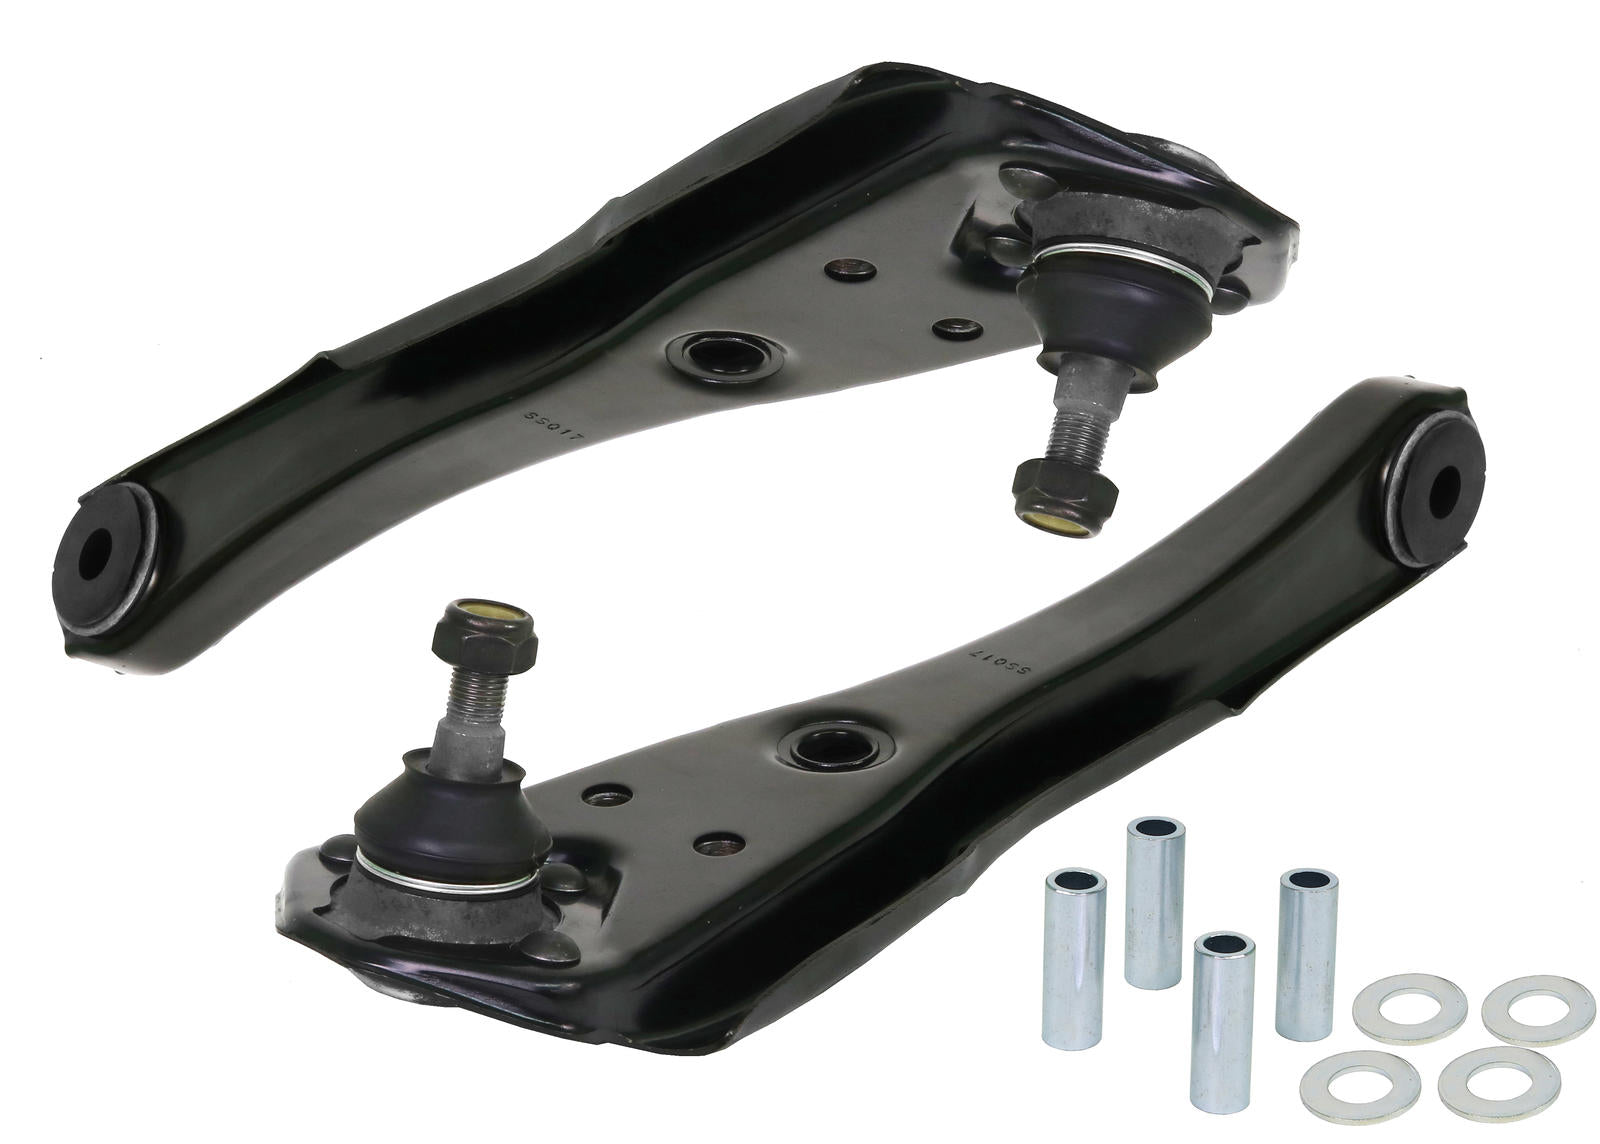 Front Control Arm Lower - Arm To Suit Ford Falcon/Fairlane XW-XF And Mustang Classic